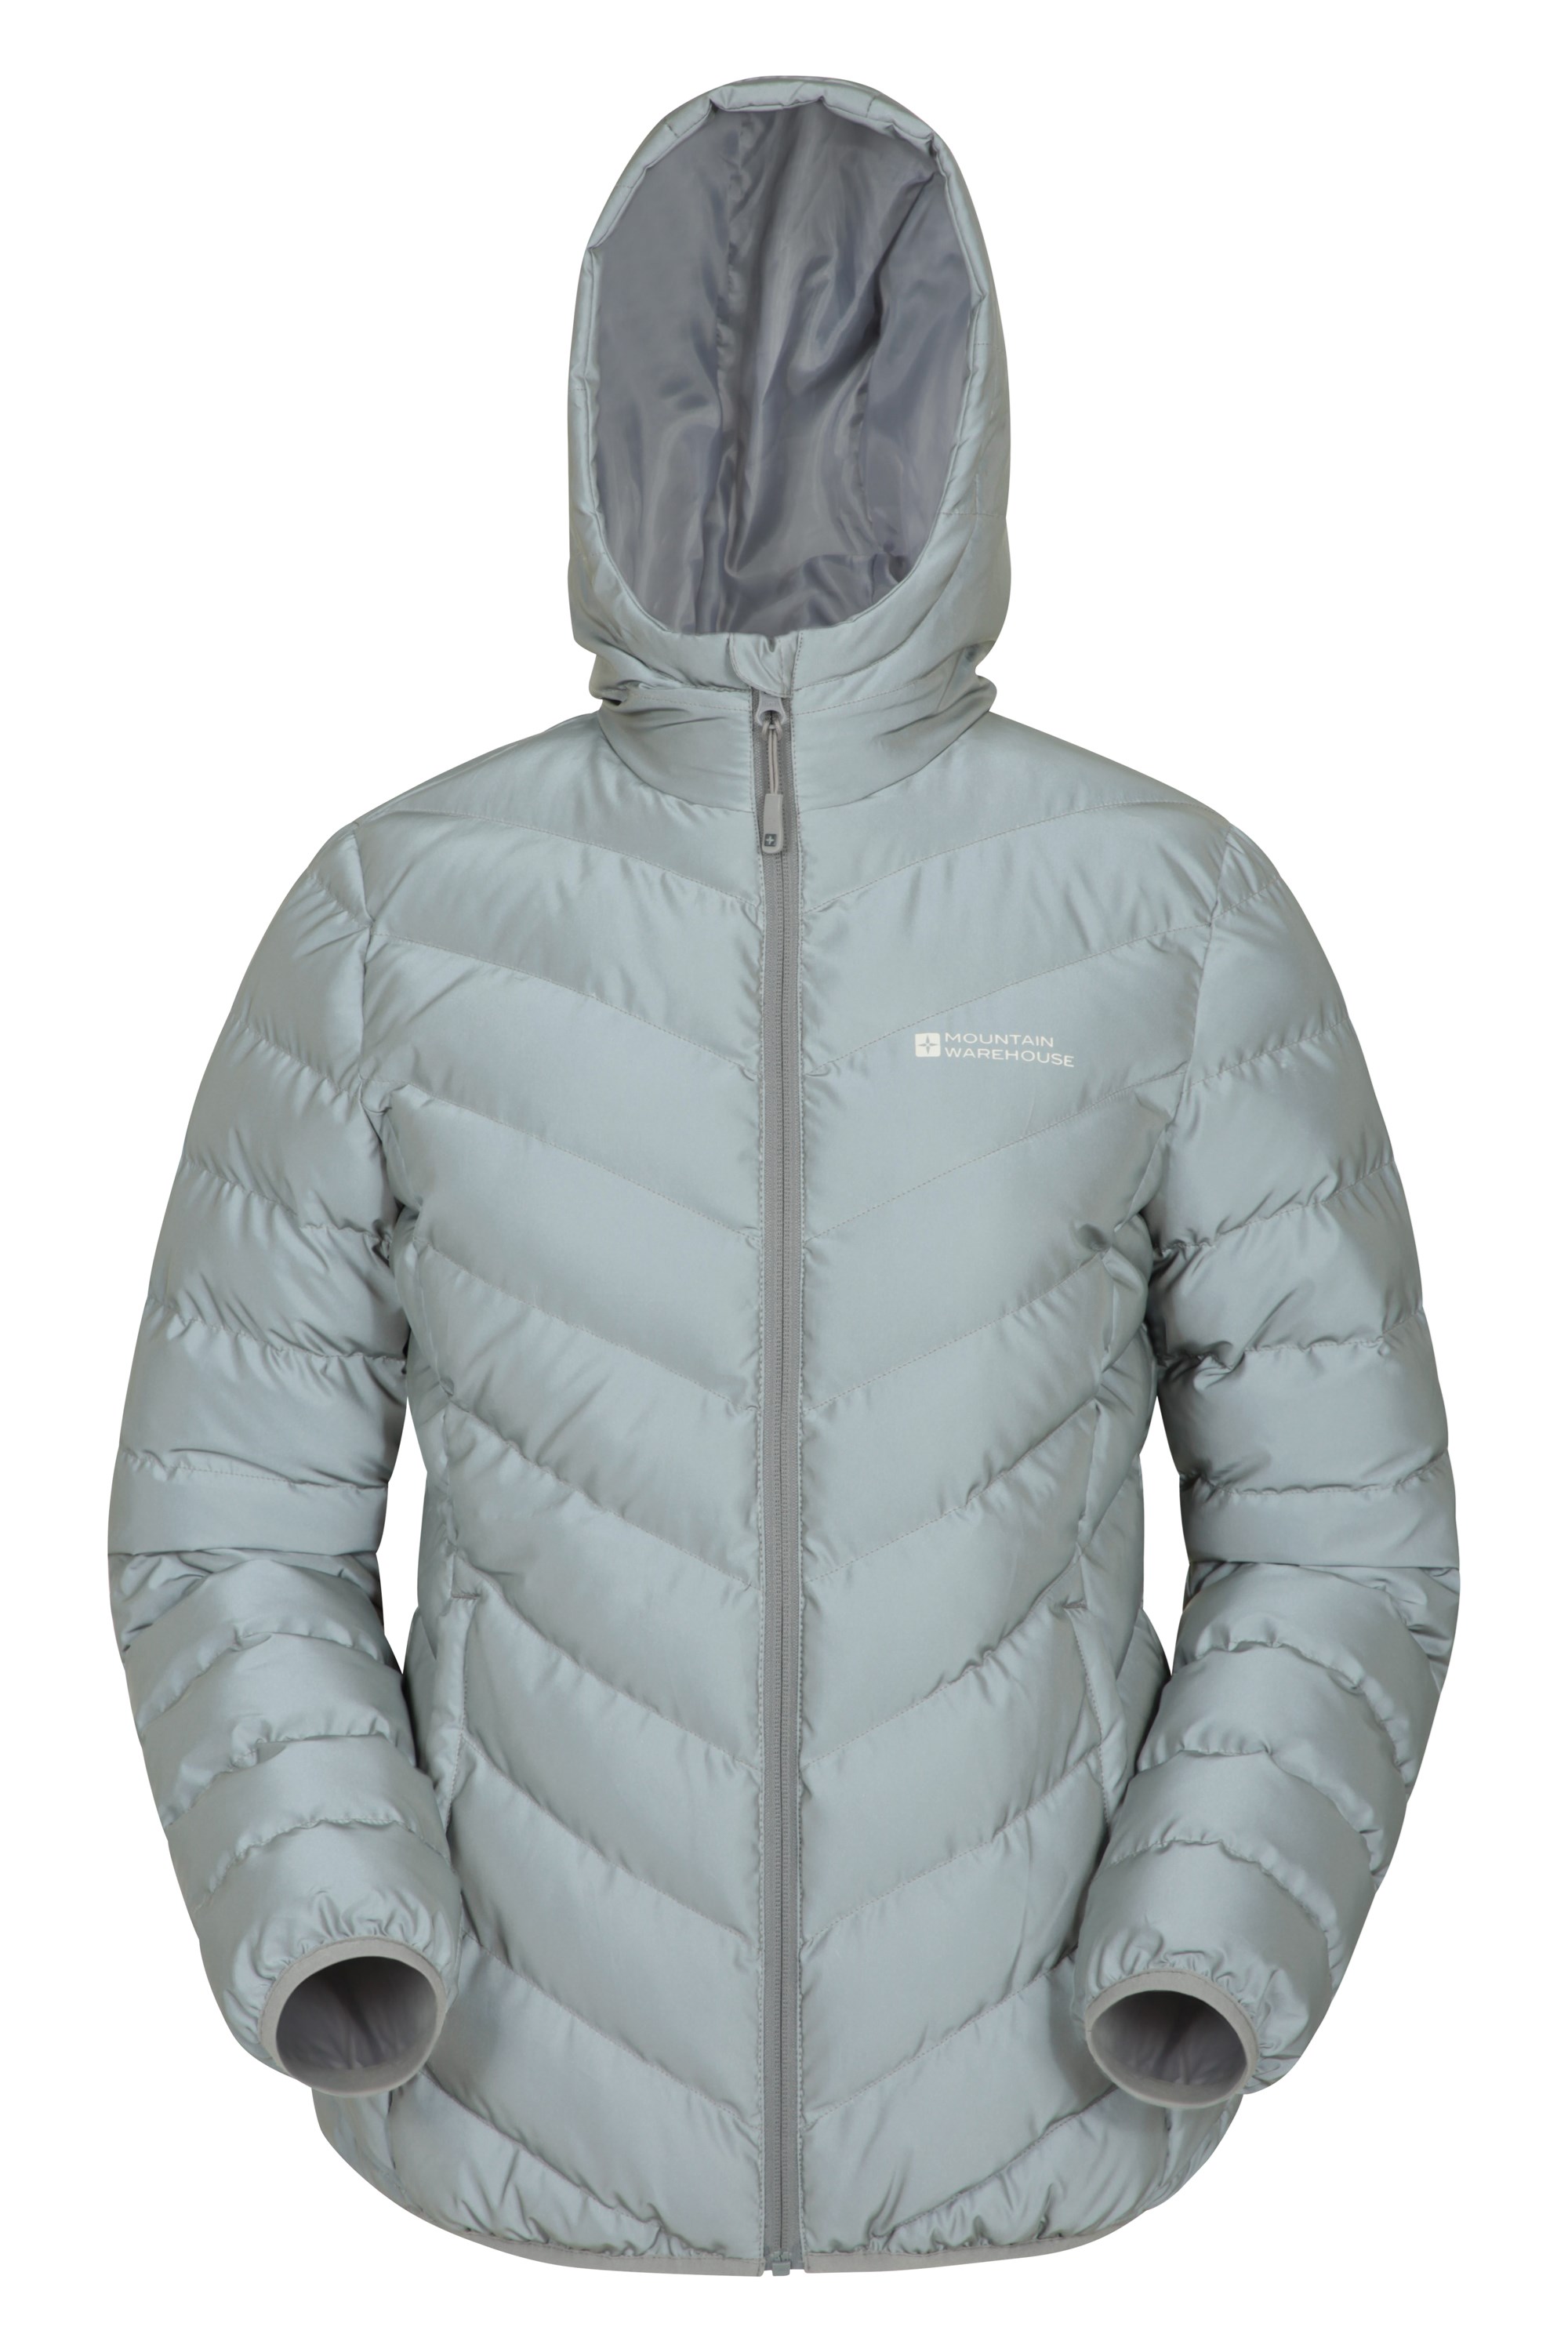 Clothing Microfibre Insulation Water-Resistant Jacket Mountain Warehouse Lightweight 